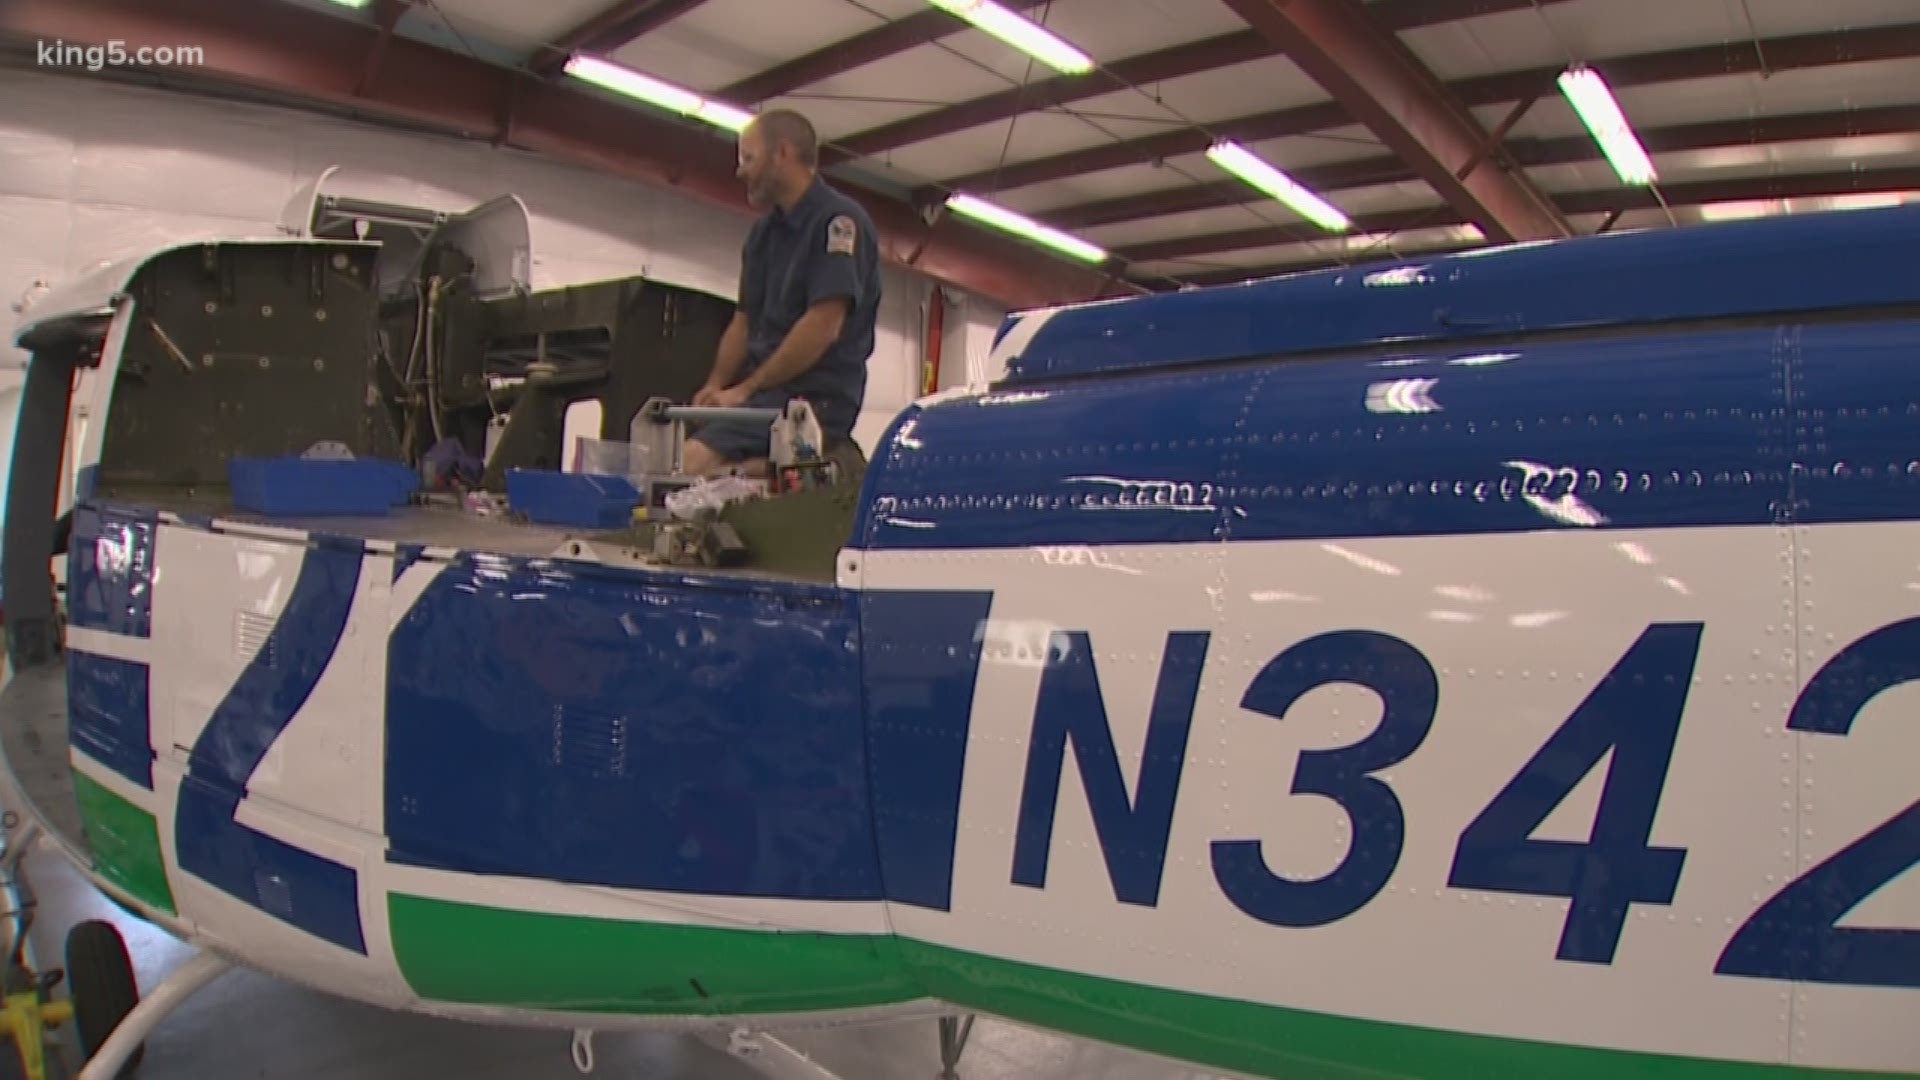 The Department of Natural Resources is using $1.1 million from the state's budget to bring the Huey helicopter back to life. The helicopter was first built in 1970.